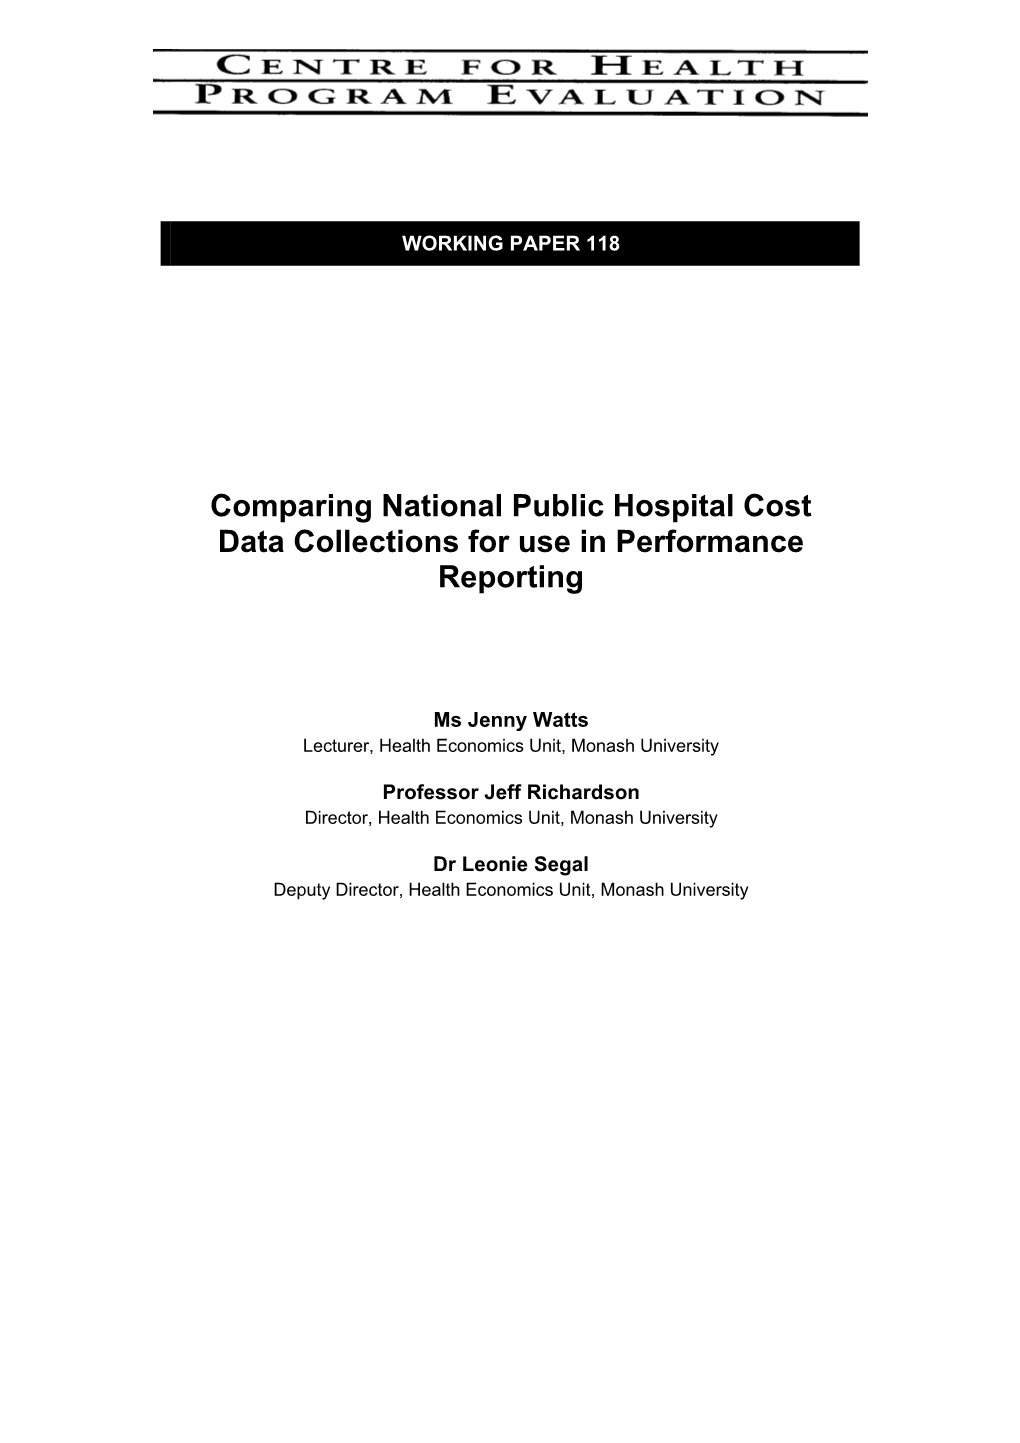 Comparing National Public Hospital Cost Data Collections for Use in Performance Reporting